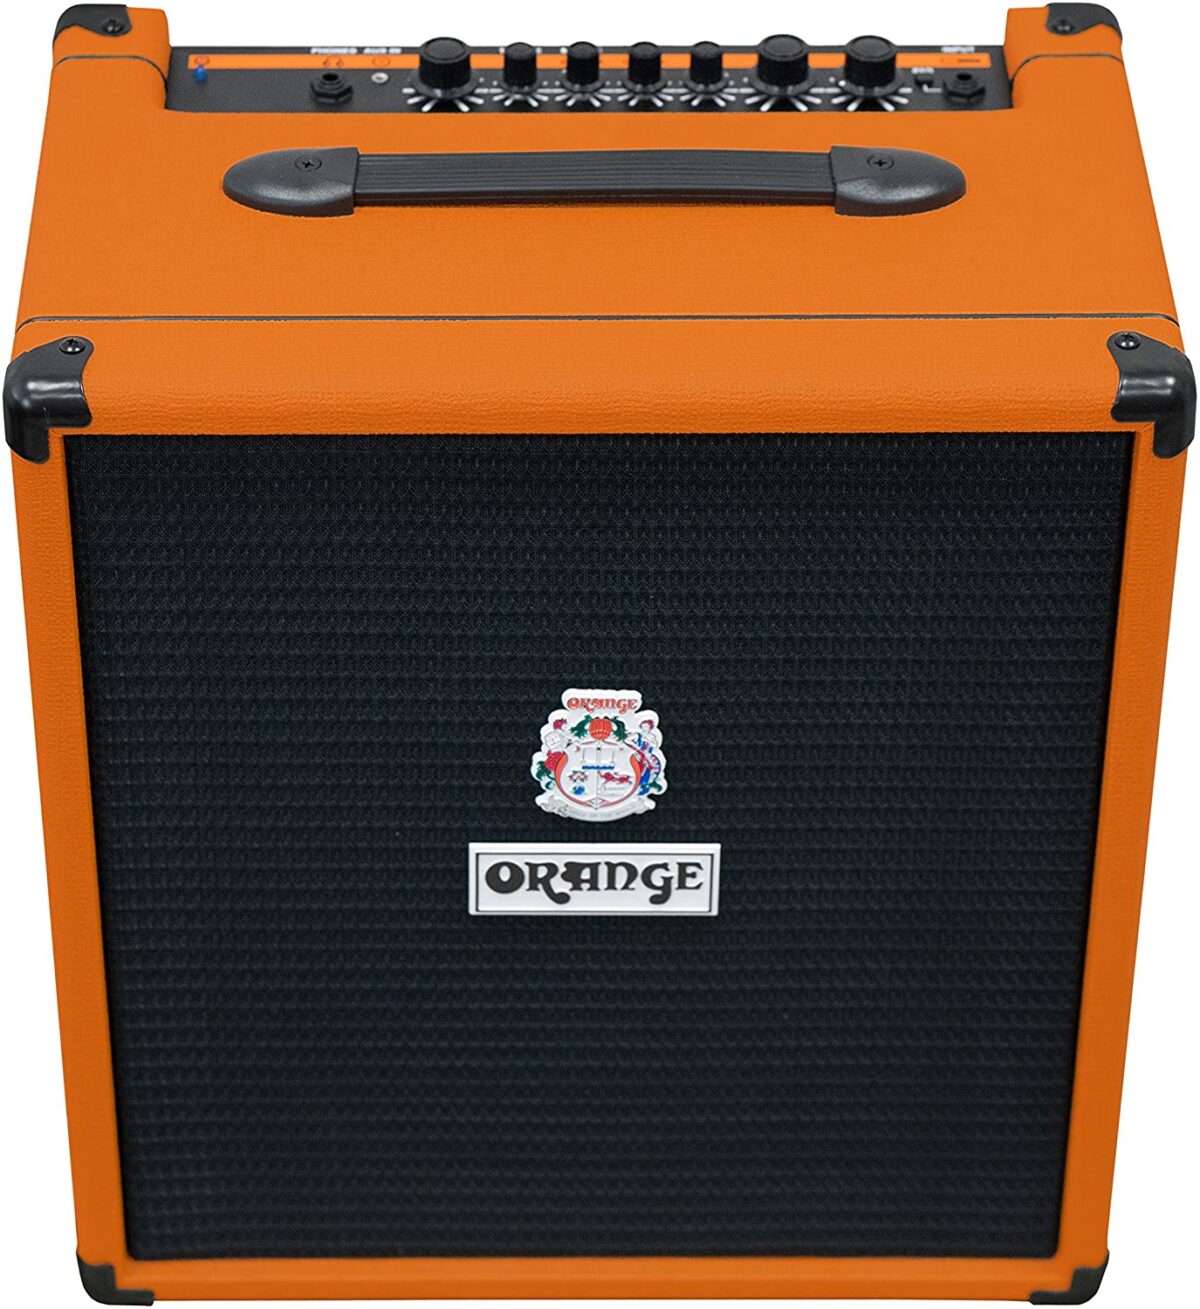 Orange 1 x12" 50W Bass Combo Amplifier with Active EQ and Parametric Mid Control